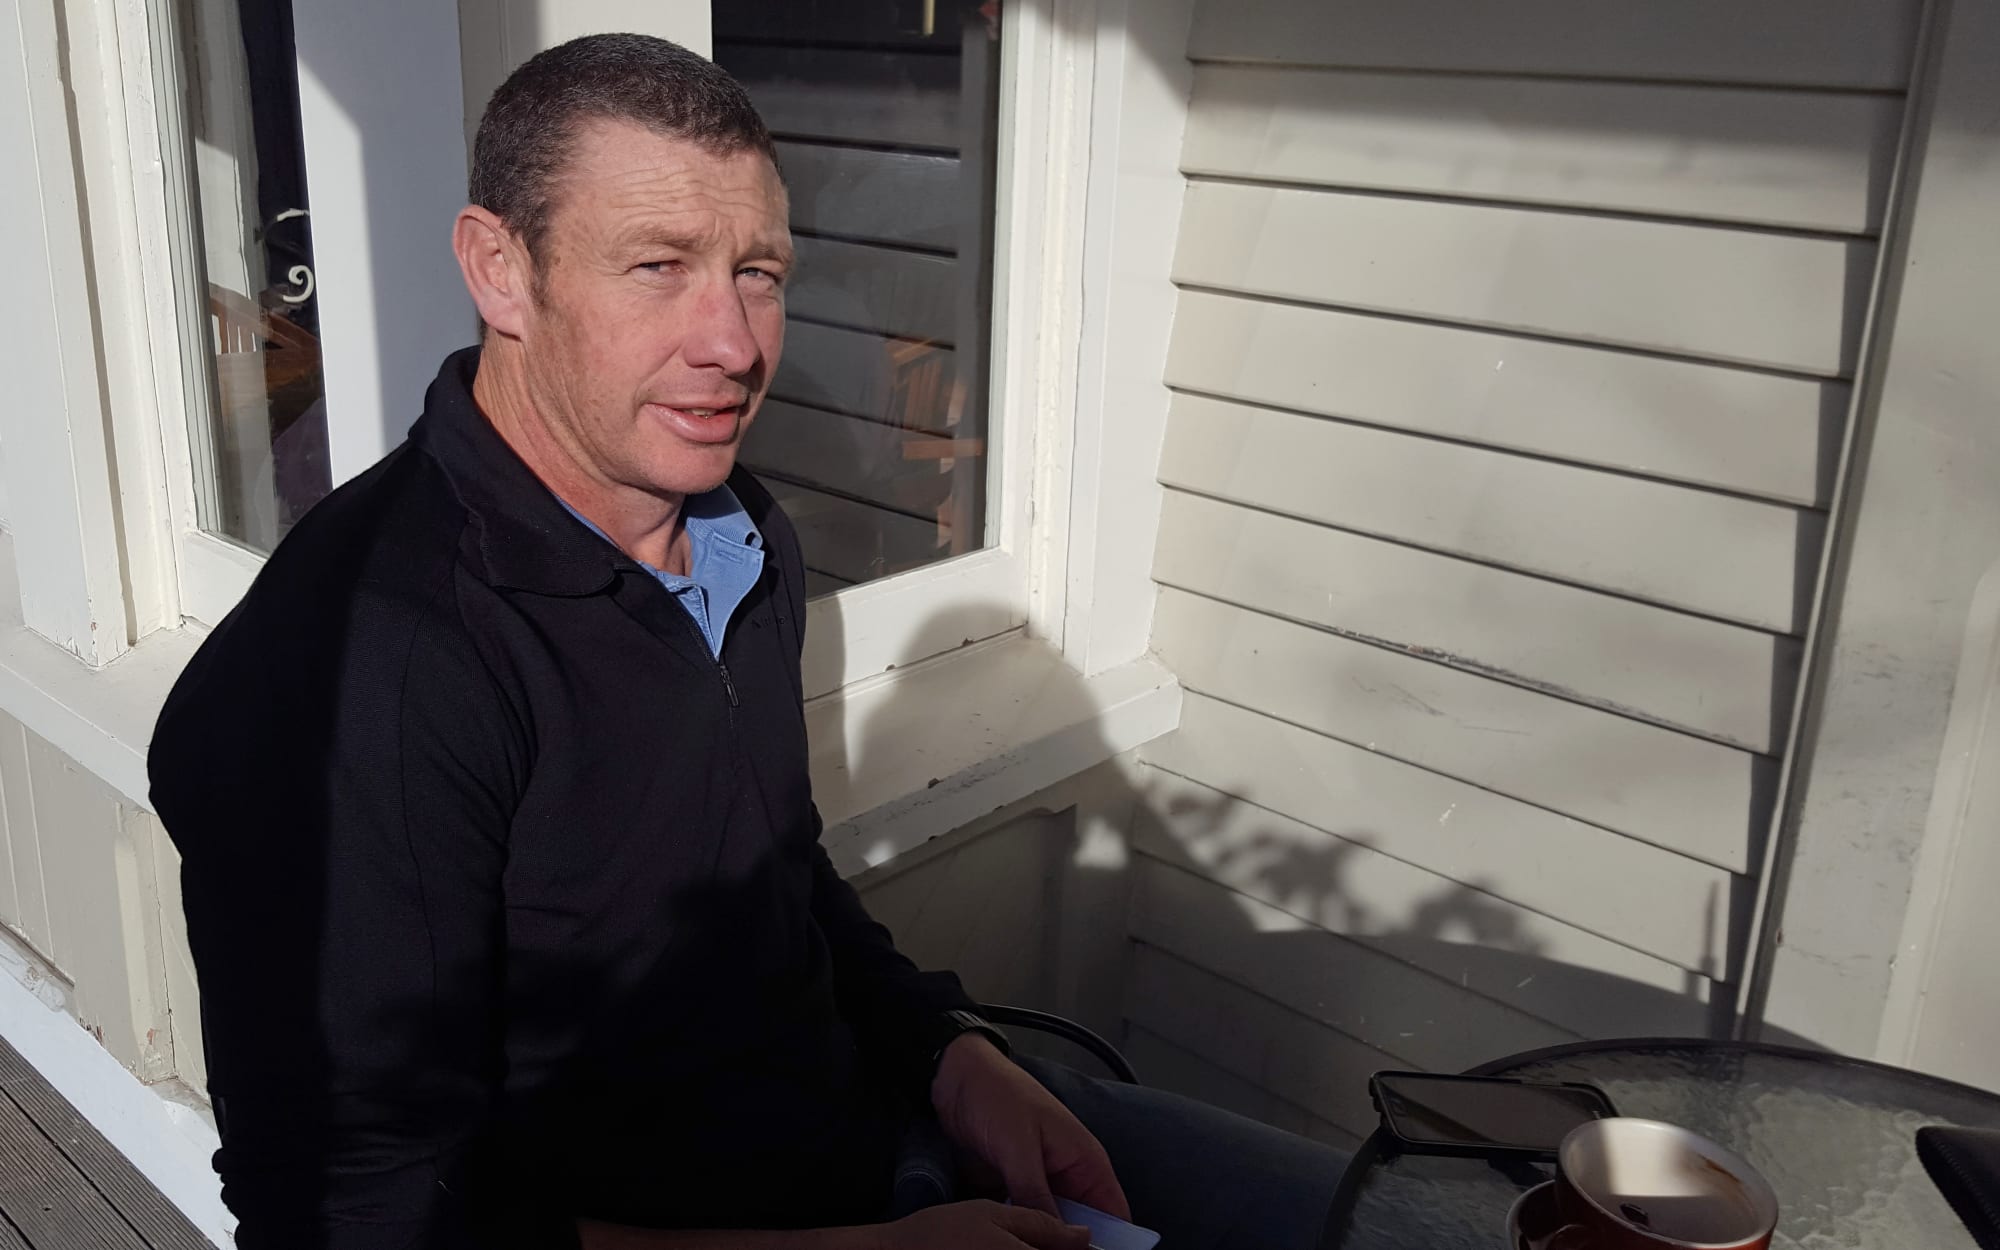 North Canterbury farmer James McCone says dairy conversions have been a boon for the region